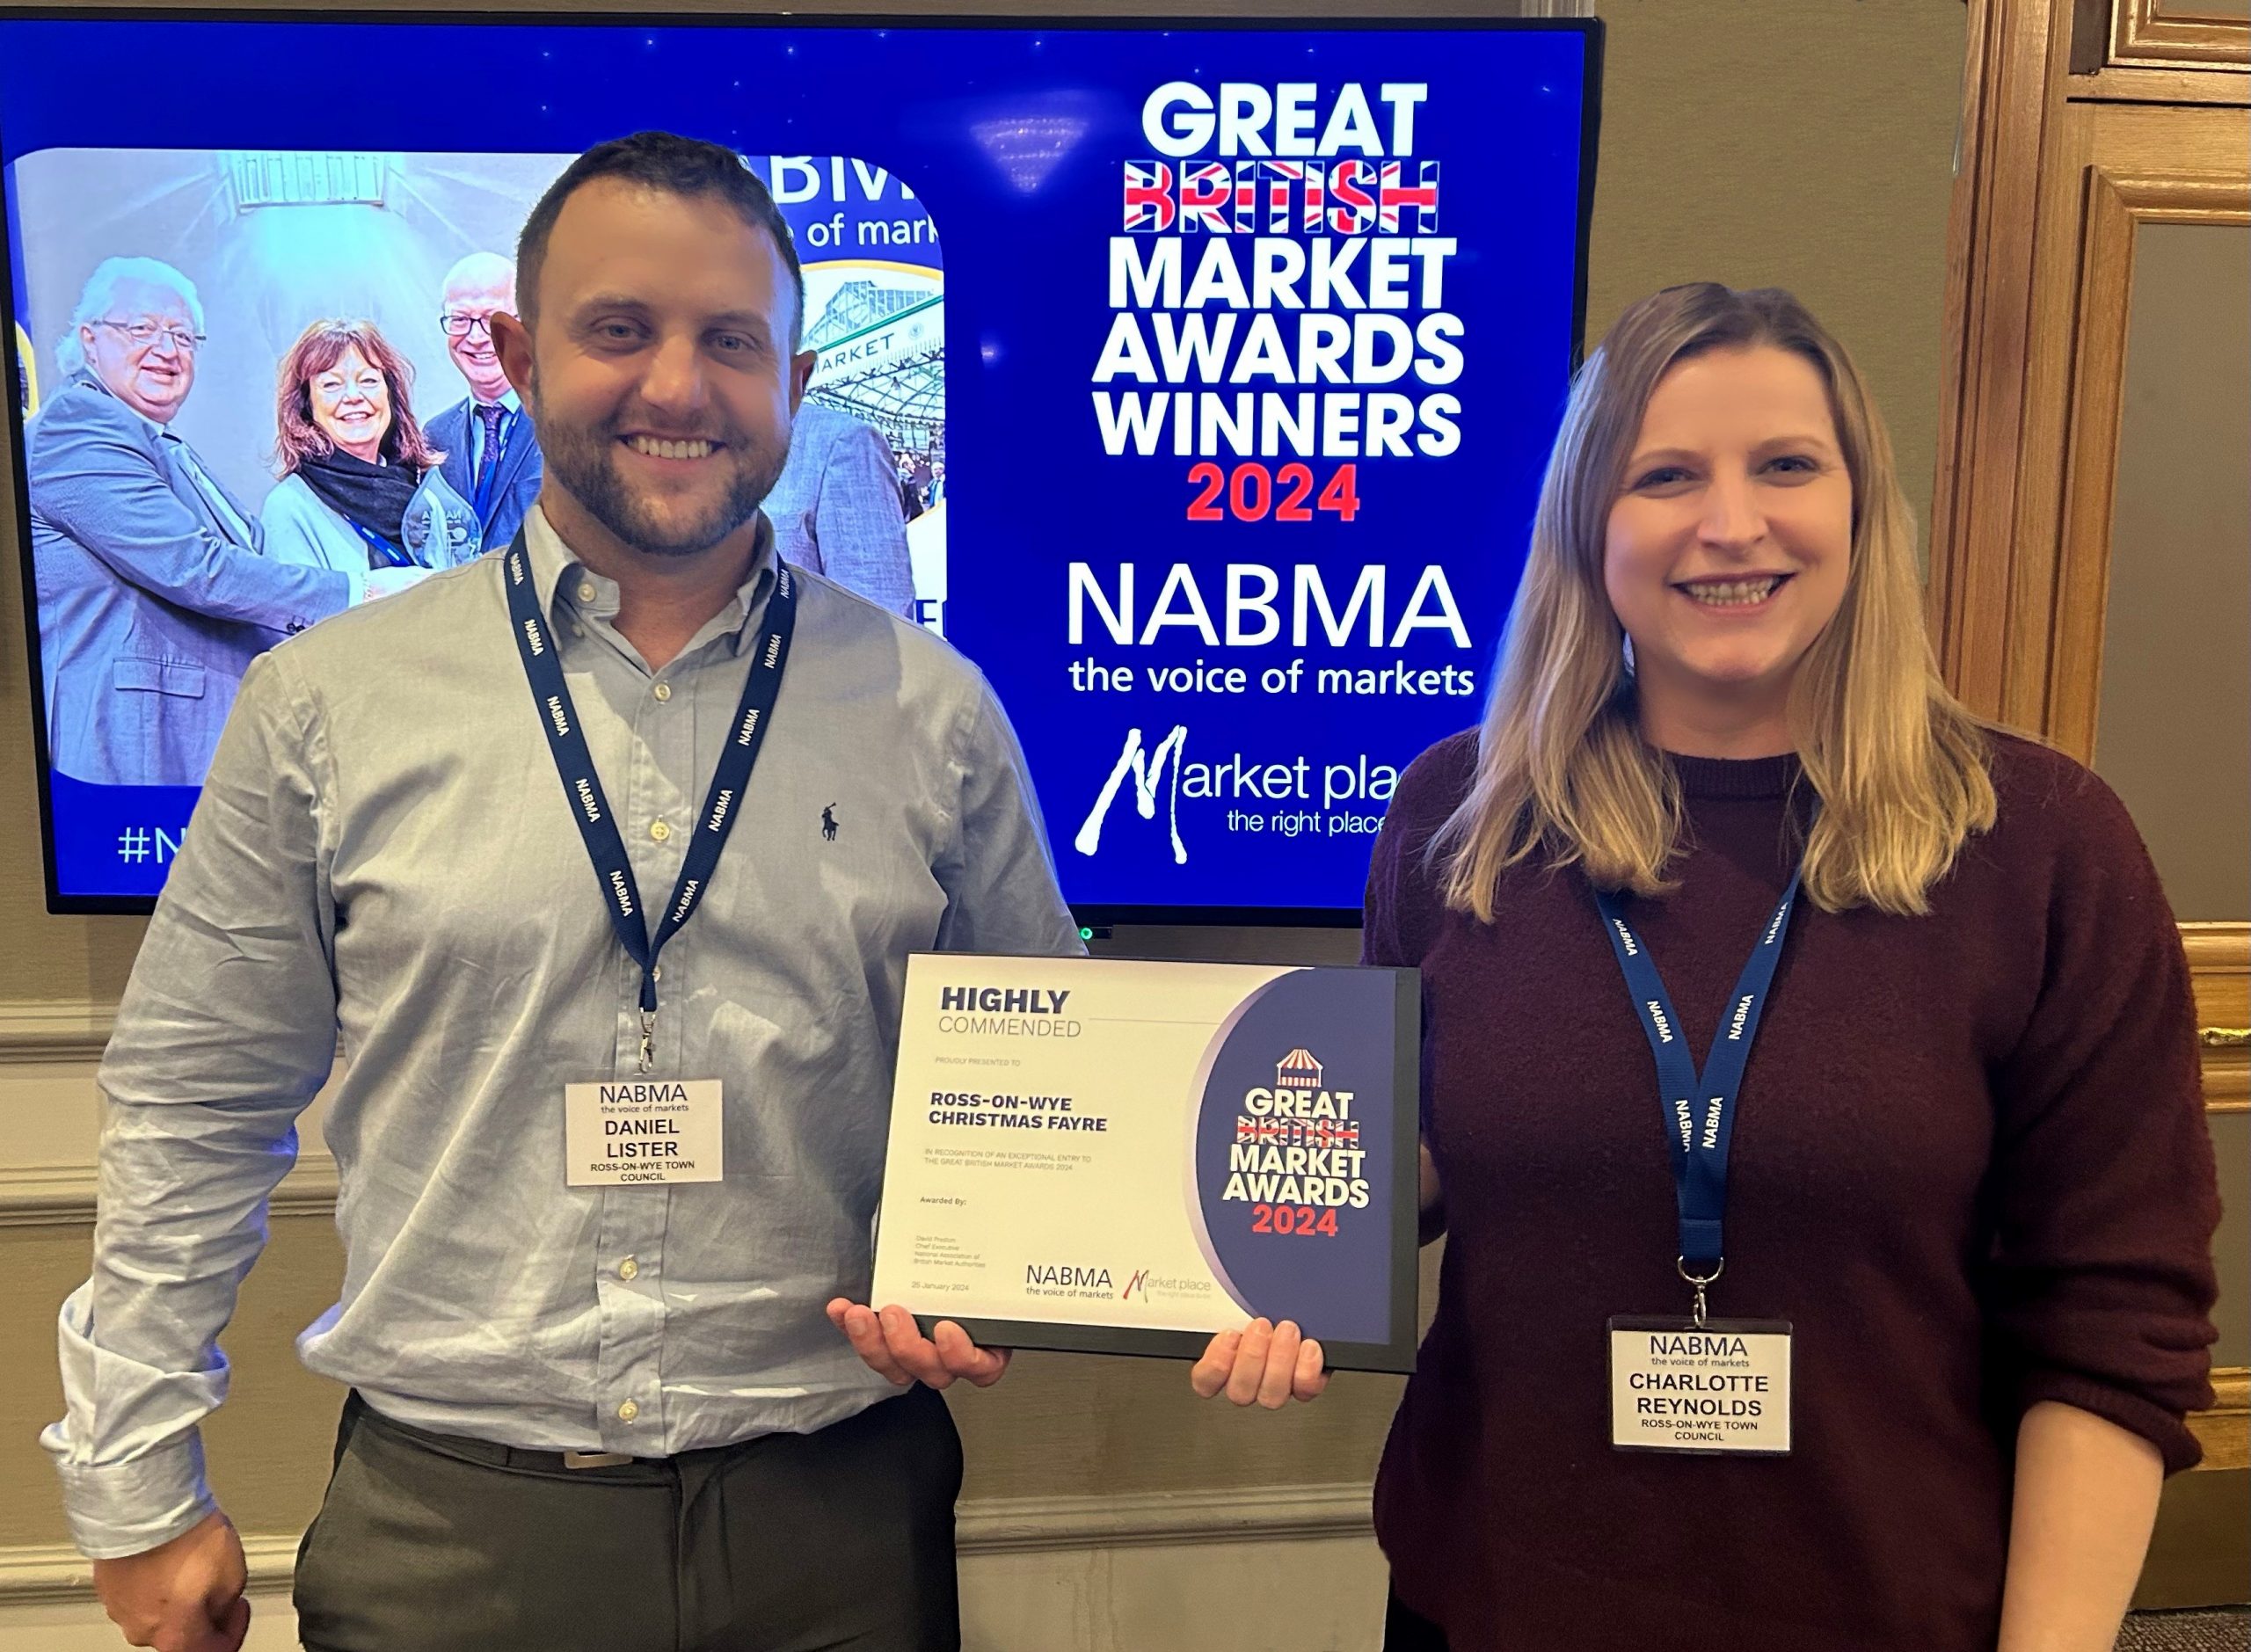 Daniel and Charlotte with Great British Market Award